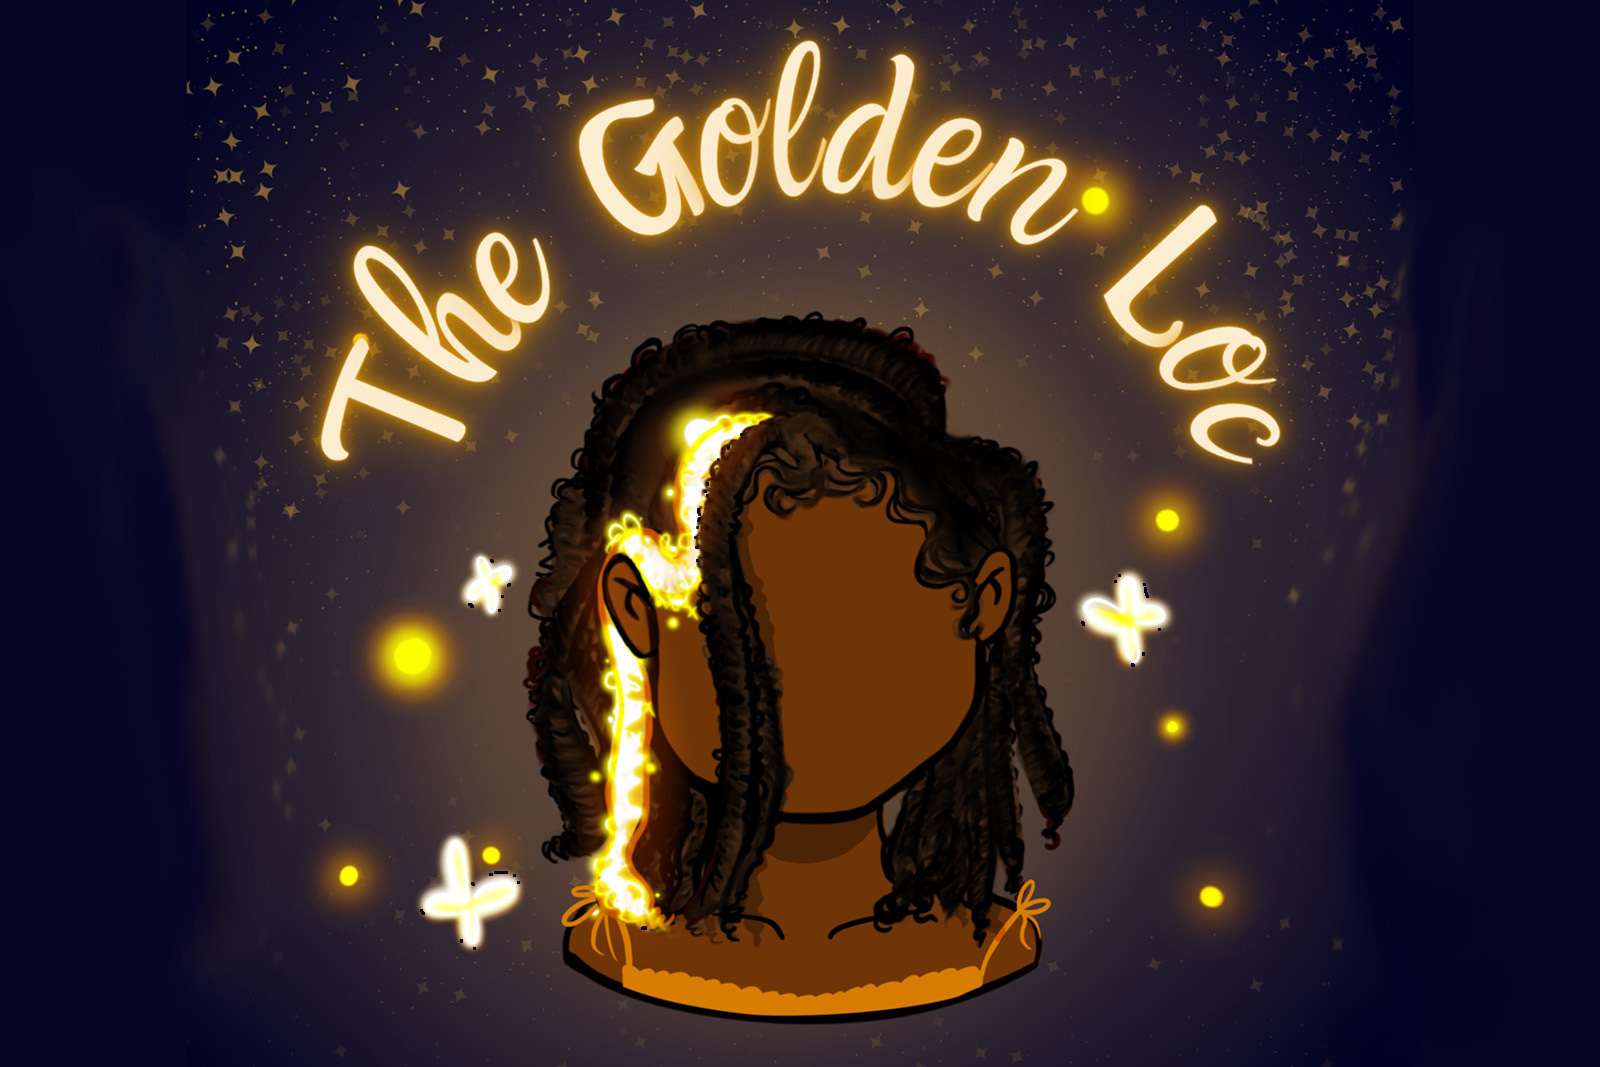 The Golden Loc A drwaing of a young Black girl with one golden loc against a dark blue background with stars